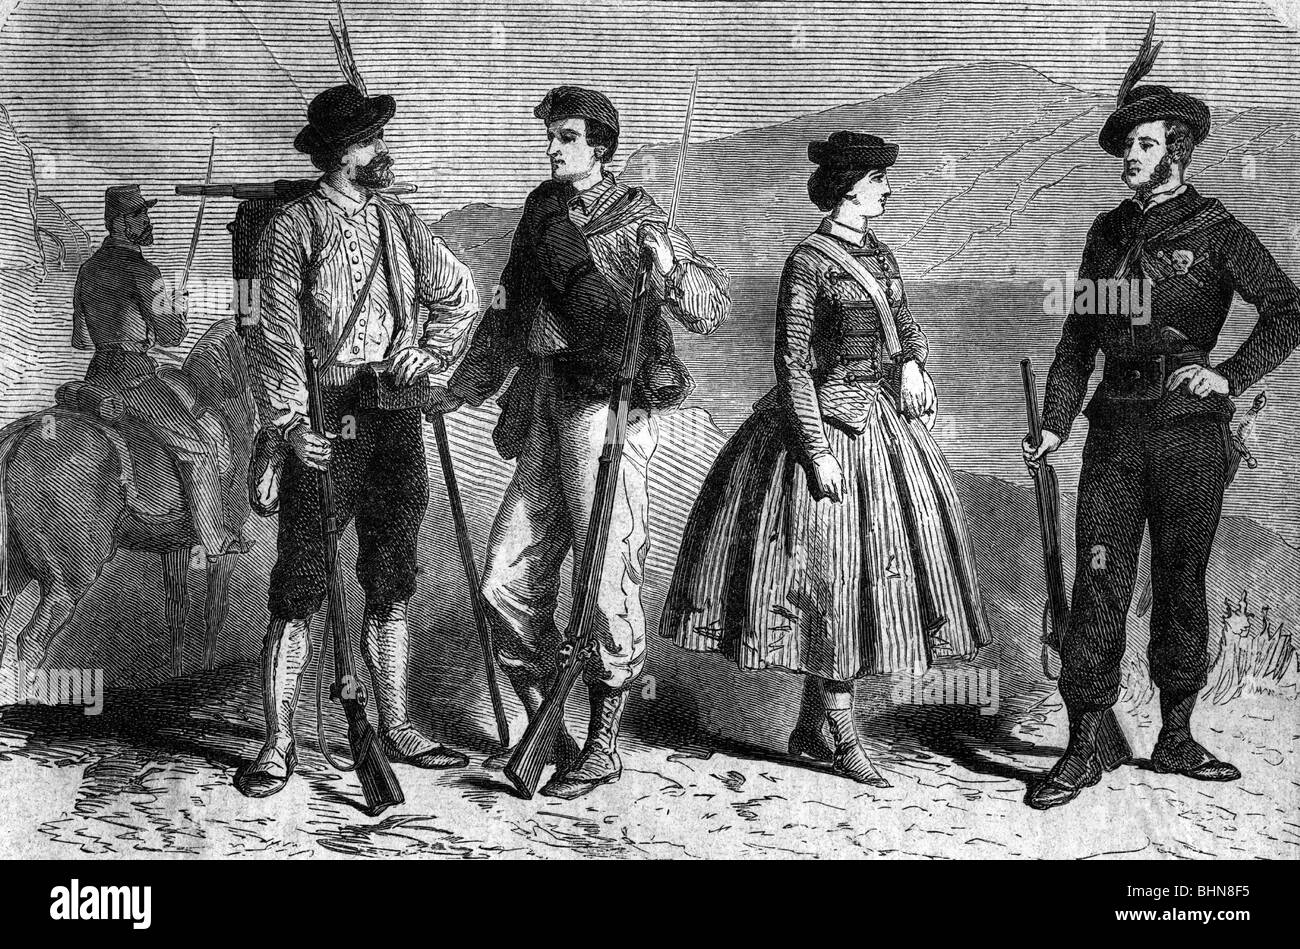 events, 'Expedition of the Thousand', 1860, types of volunteers of Giuseppe Garibaldi, wood engraving, 1860, , Stock Photo